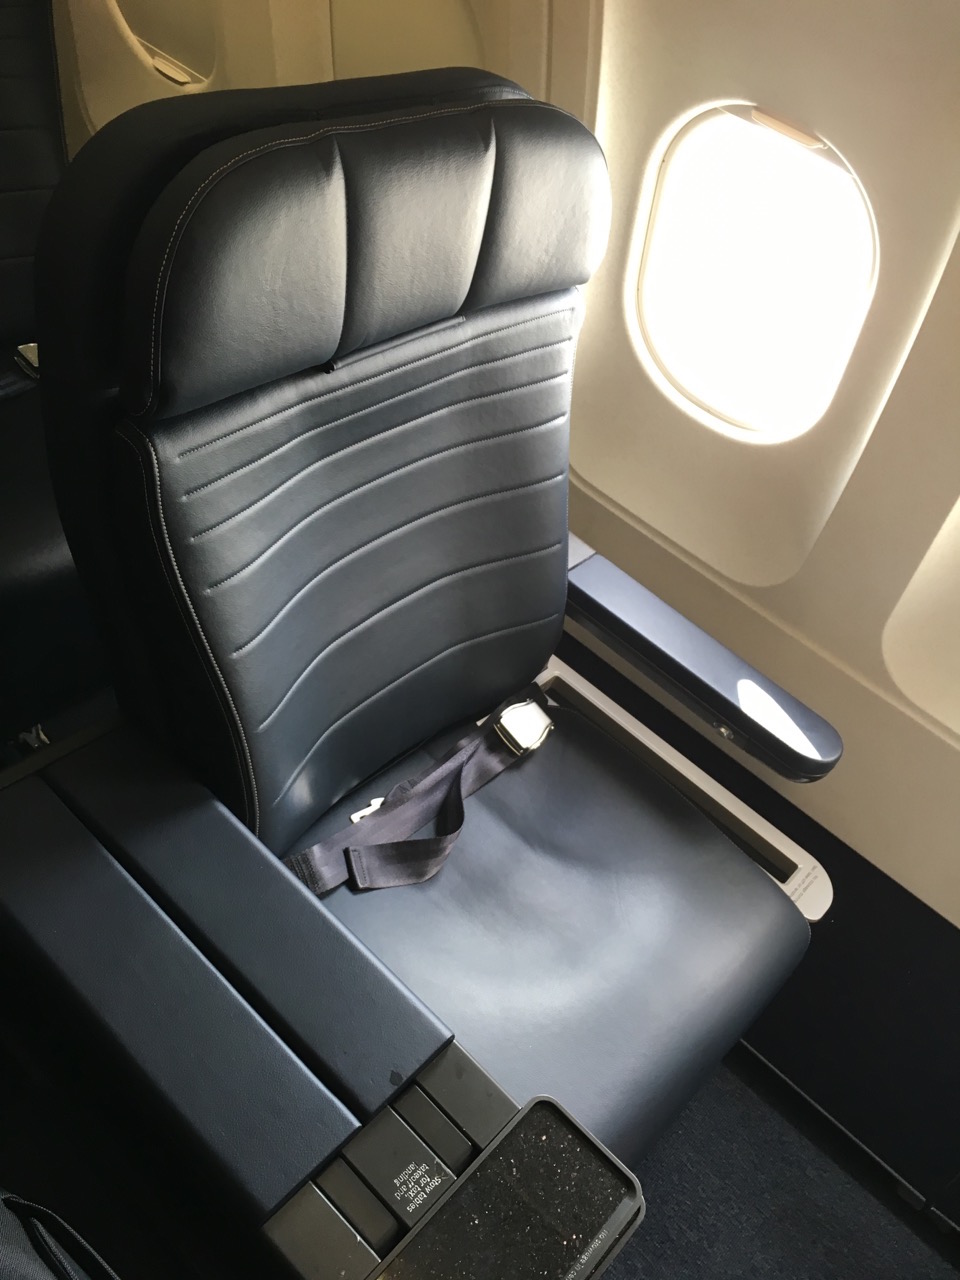 Review: New United Airlines Domestic First Class